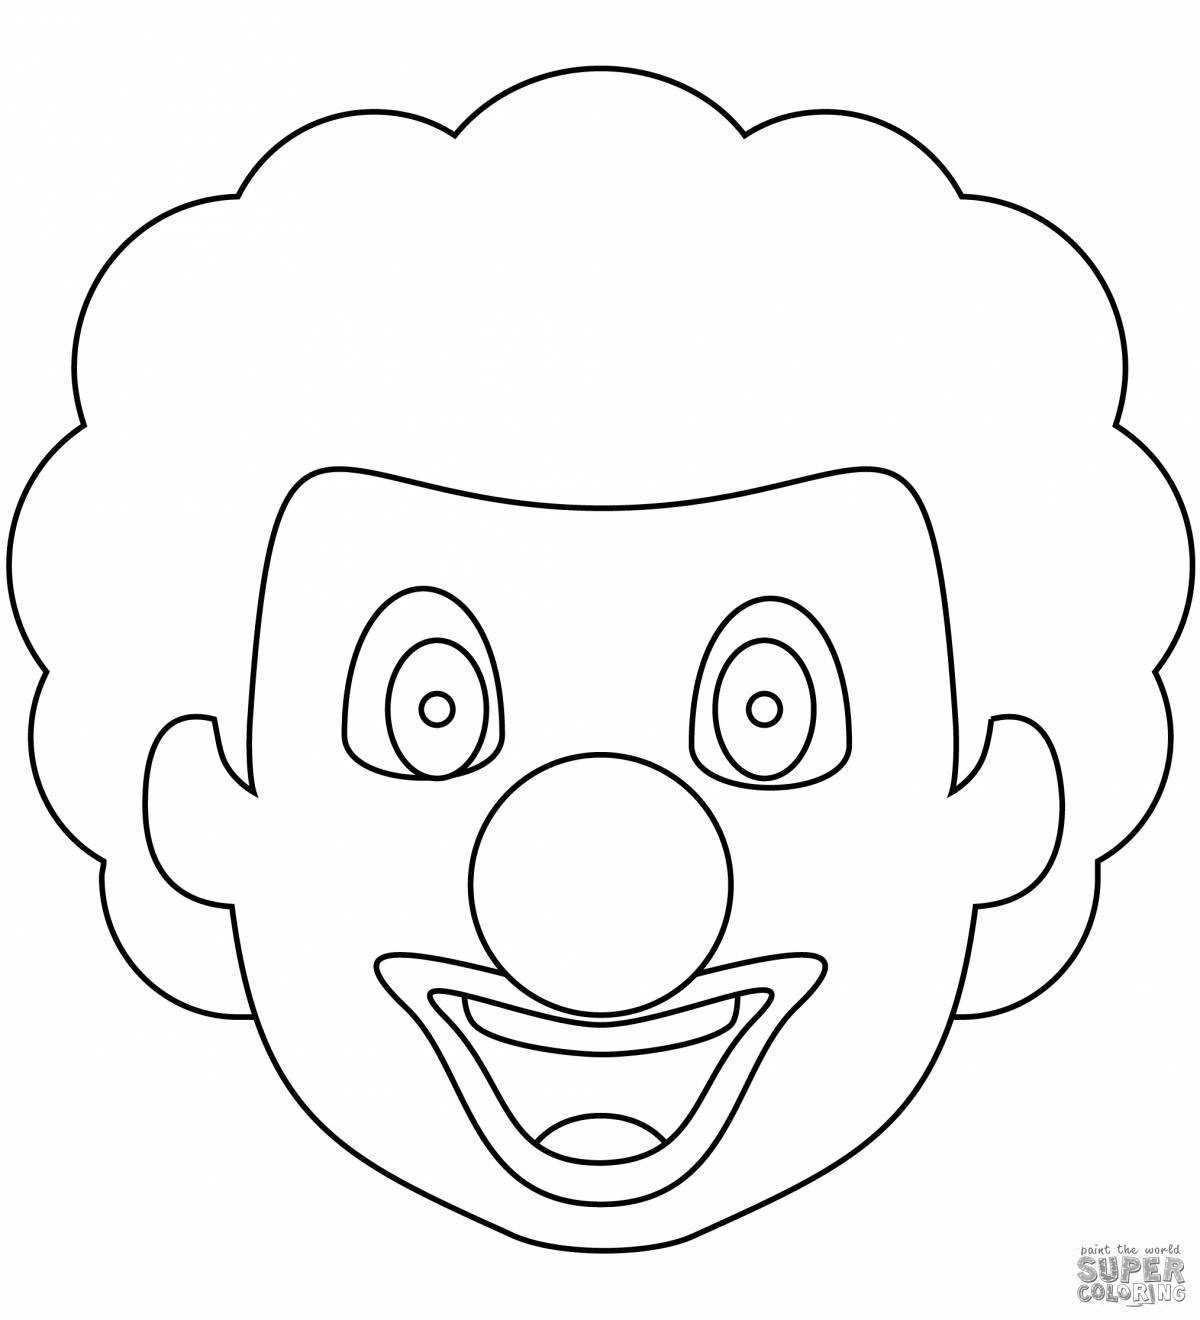 Fun clown face coloring for kids